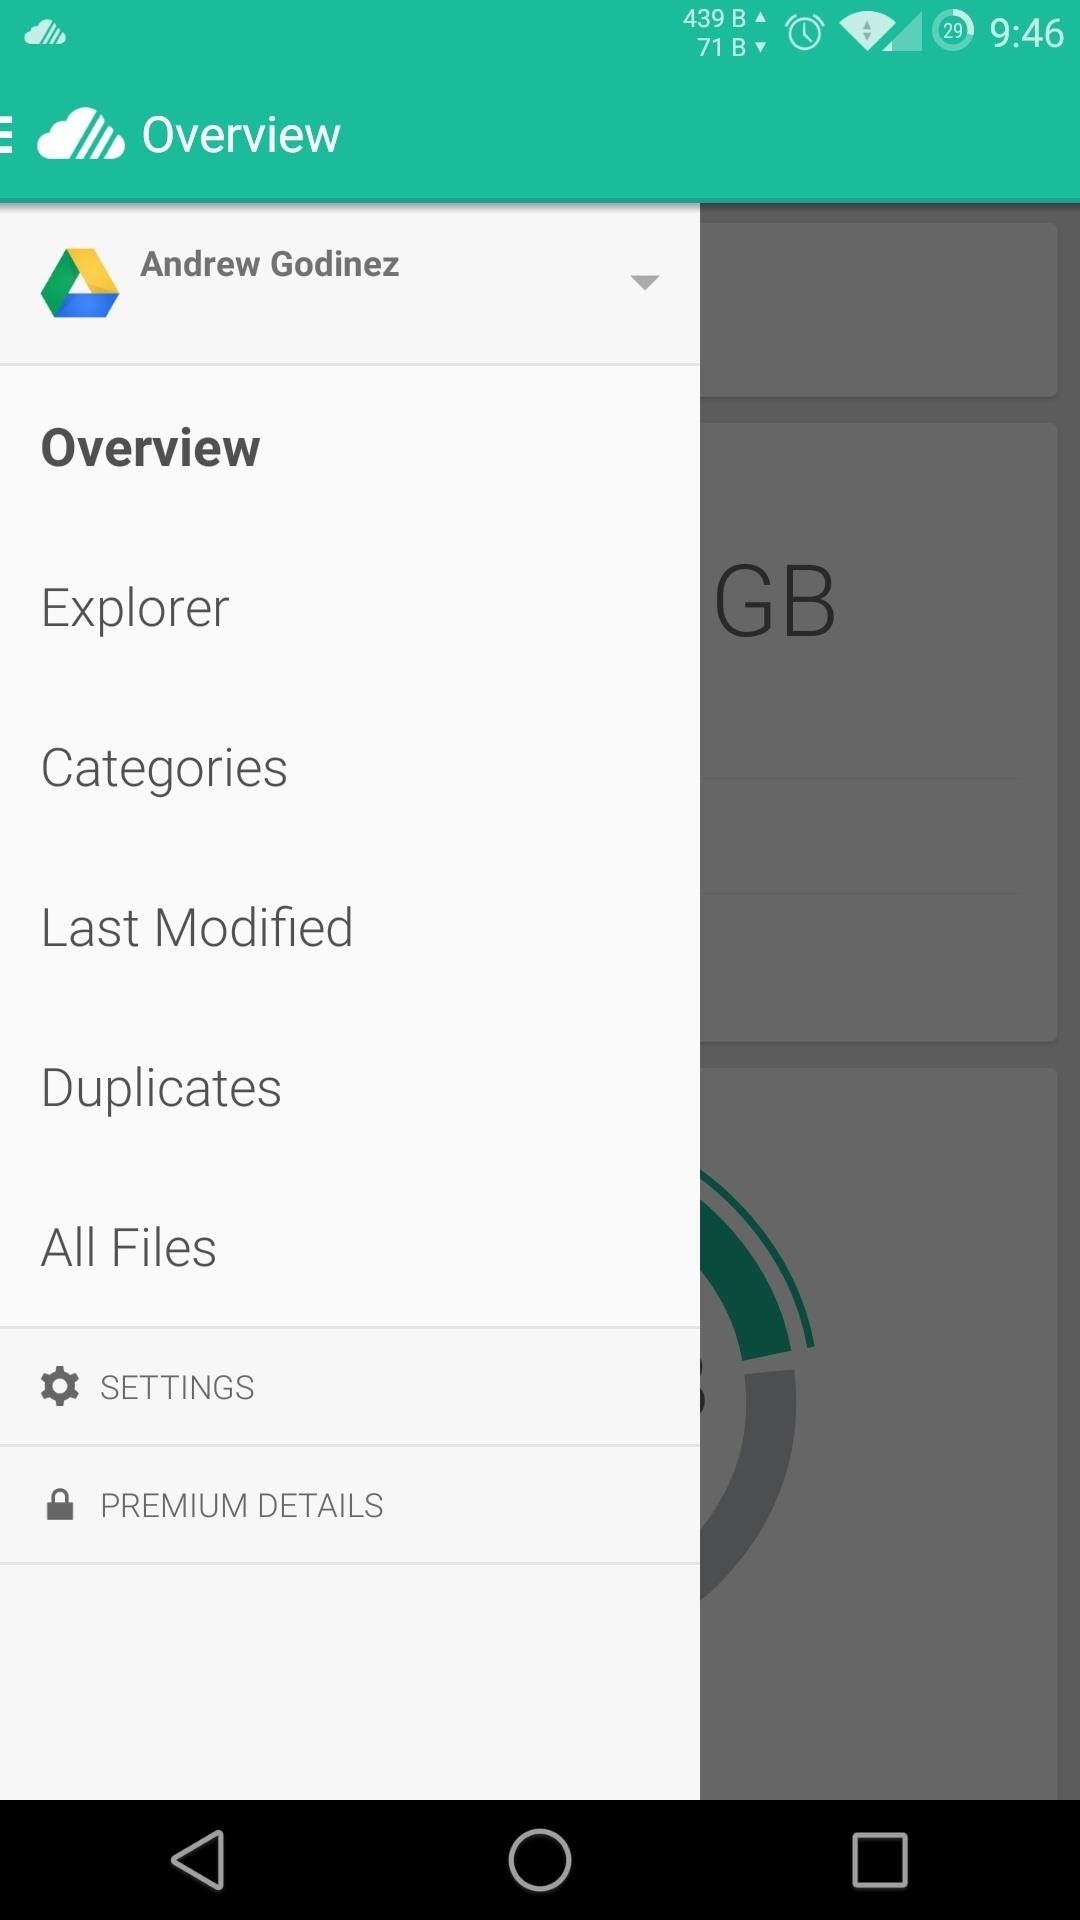 How to Quickly Track & Free Up Space in Your Cloud Storage